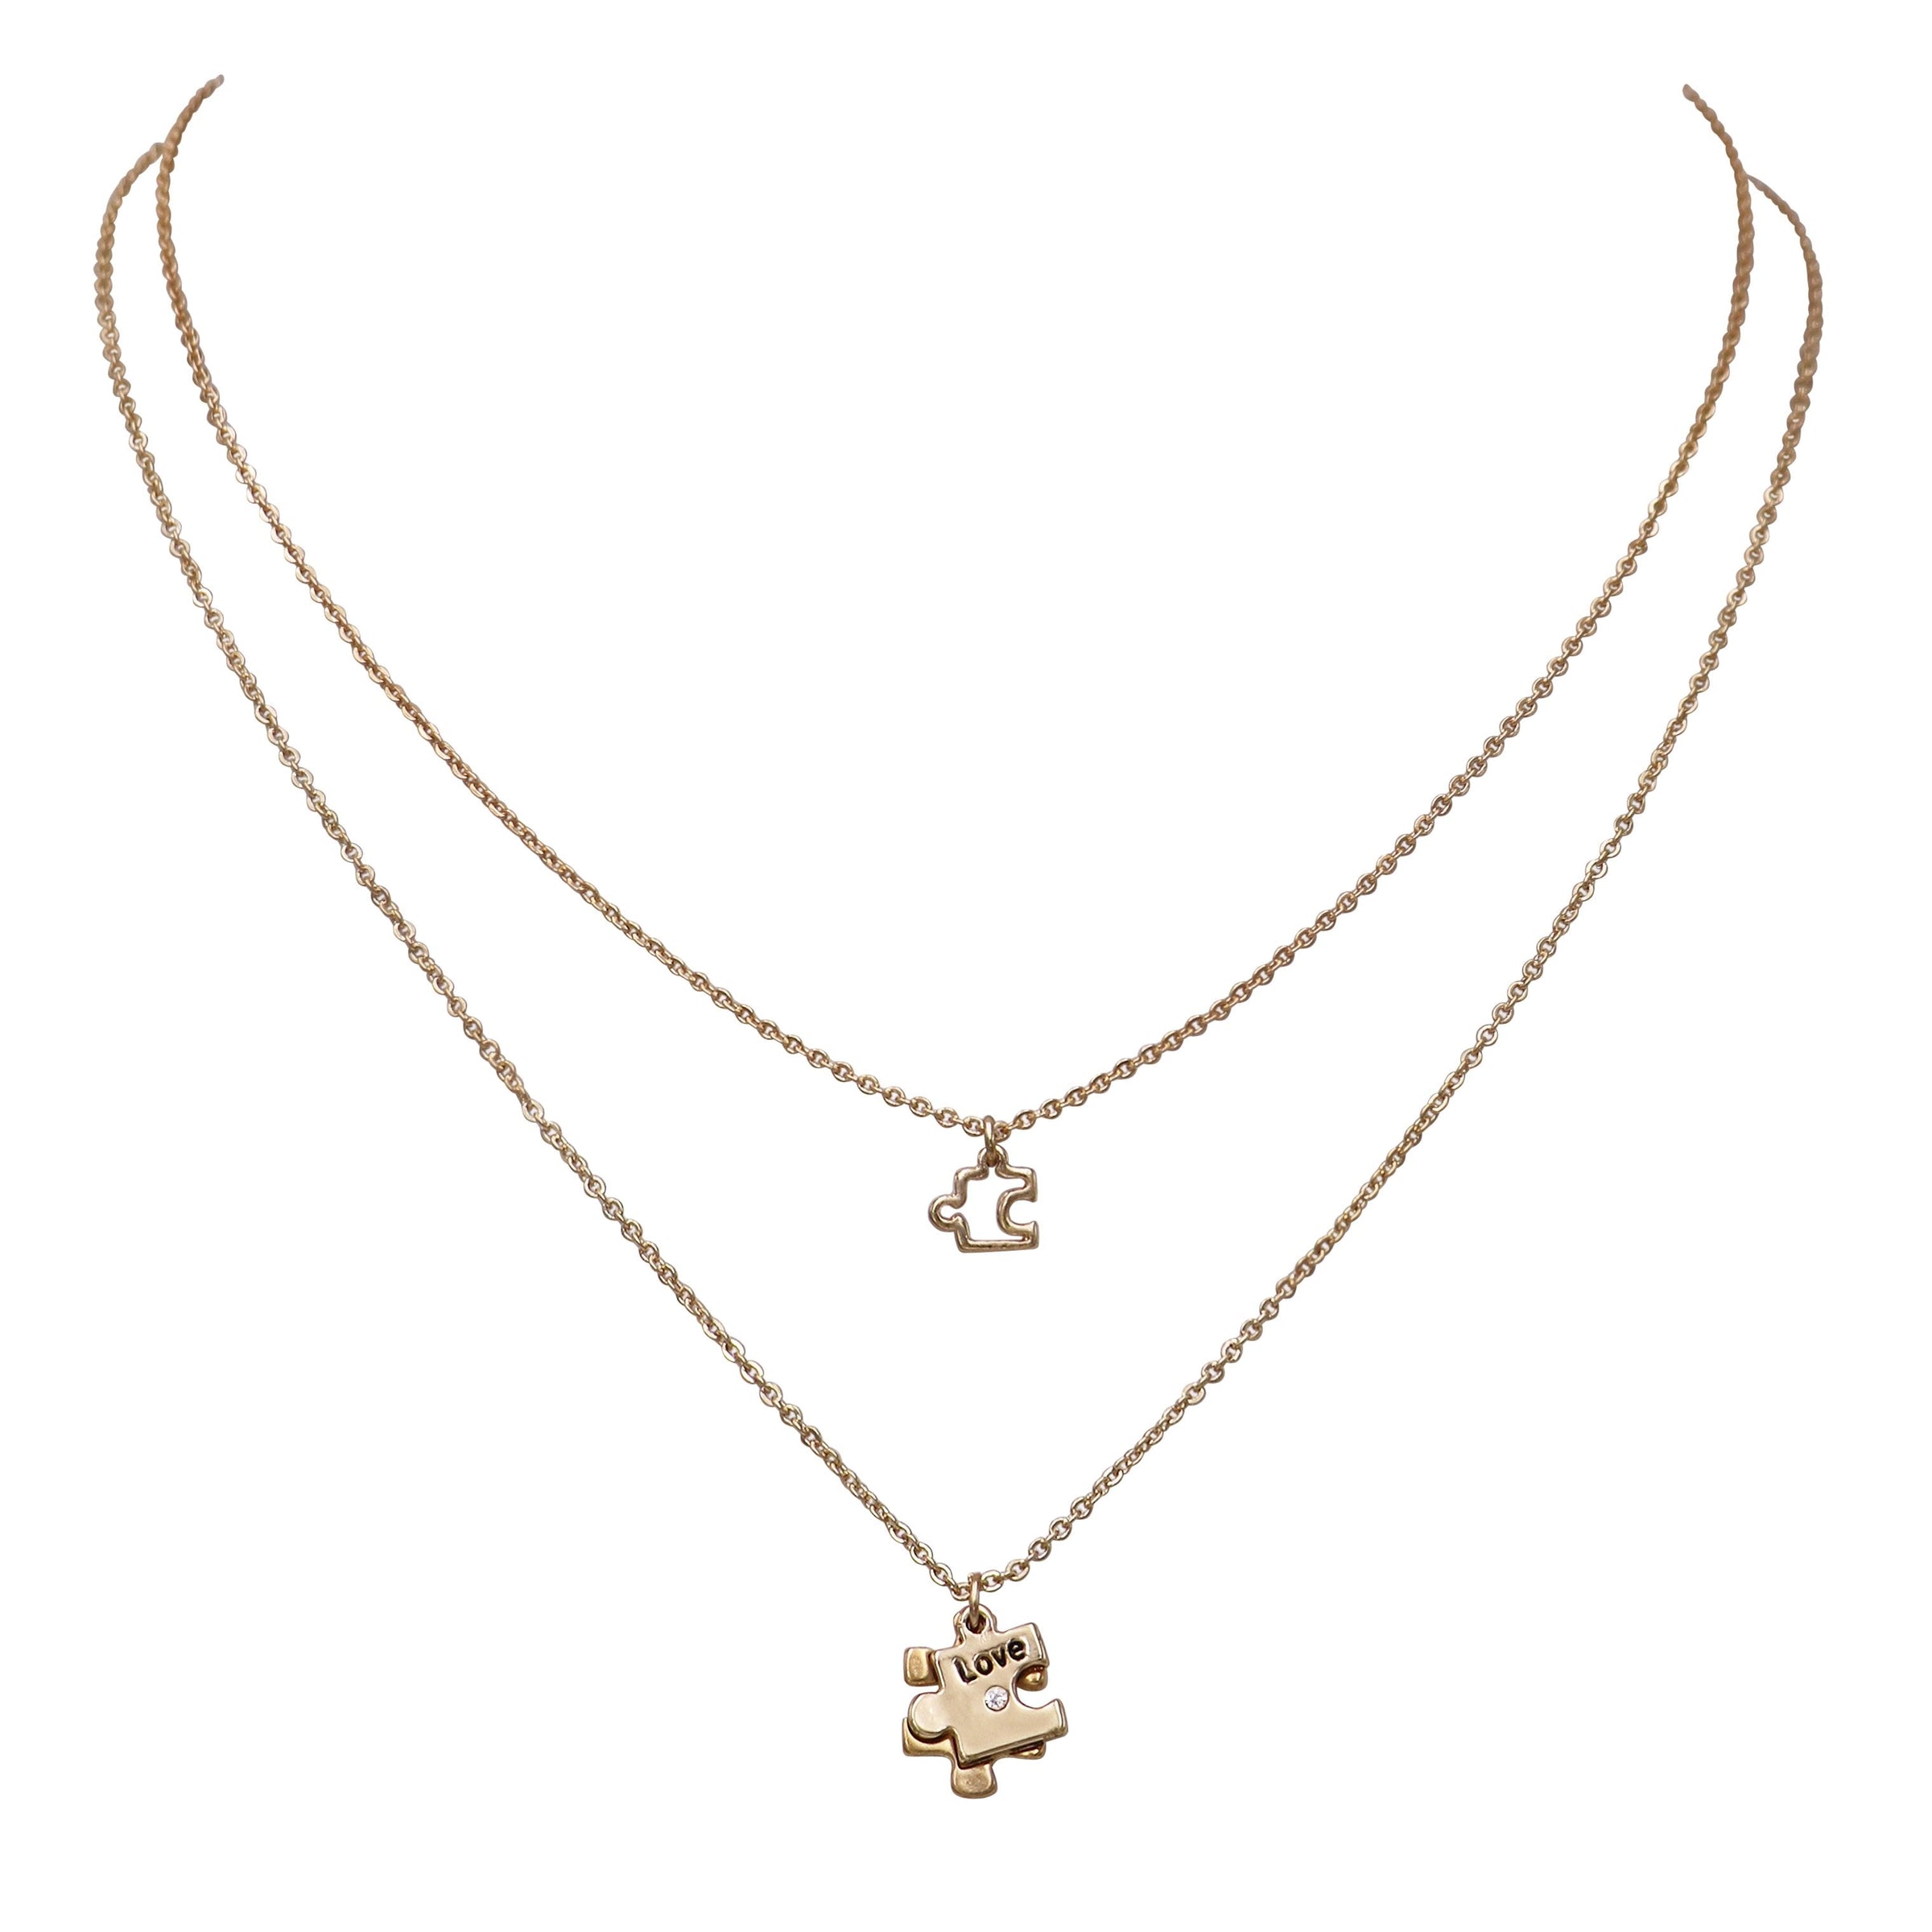 Set of 2 Polished Metal With Crystal Rhinestone Autism Awareness Puzzle Piece Charm Necklaces, (Gold Tone) 16"-19" & 18"-21" with the 3" Extender